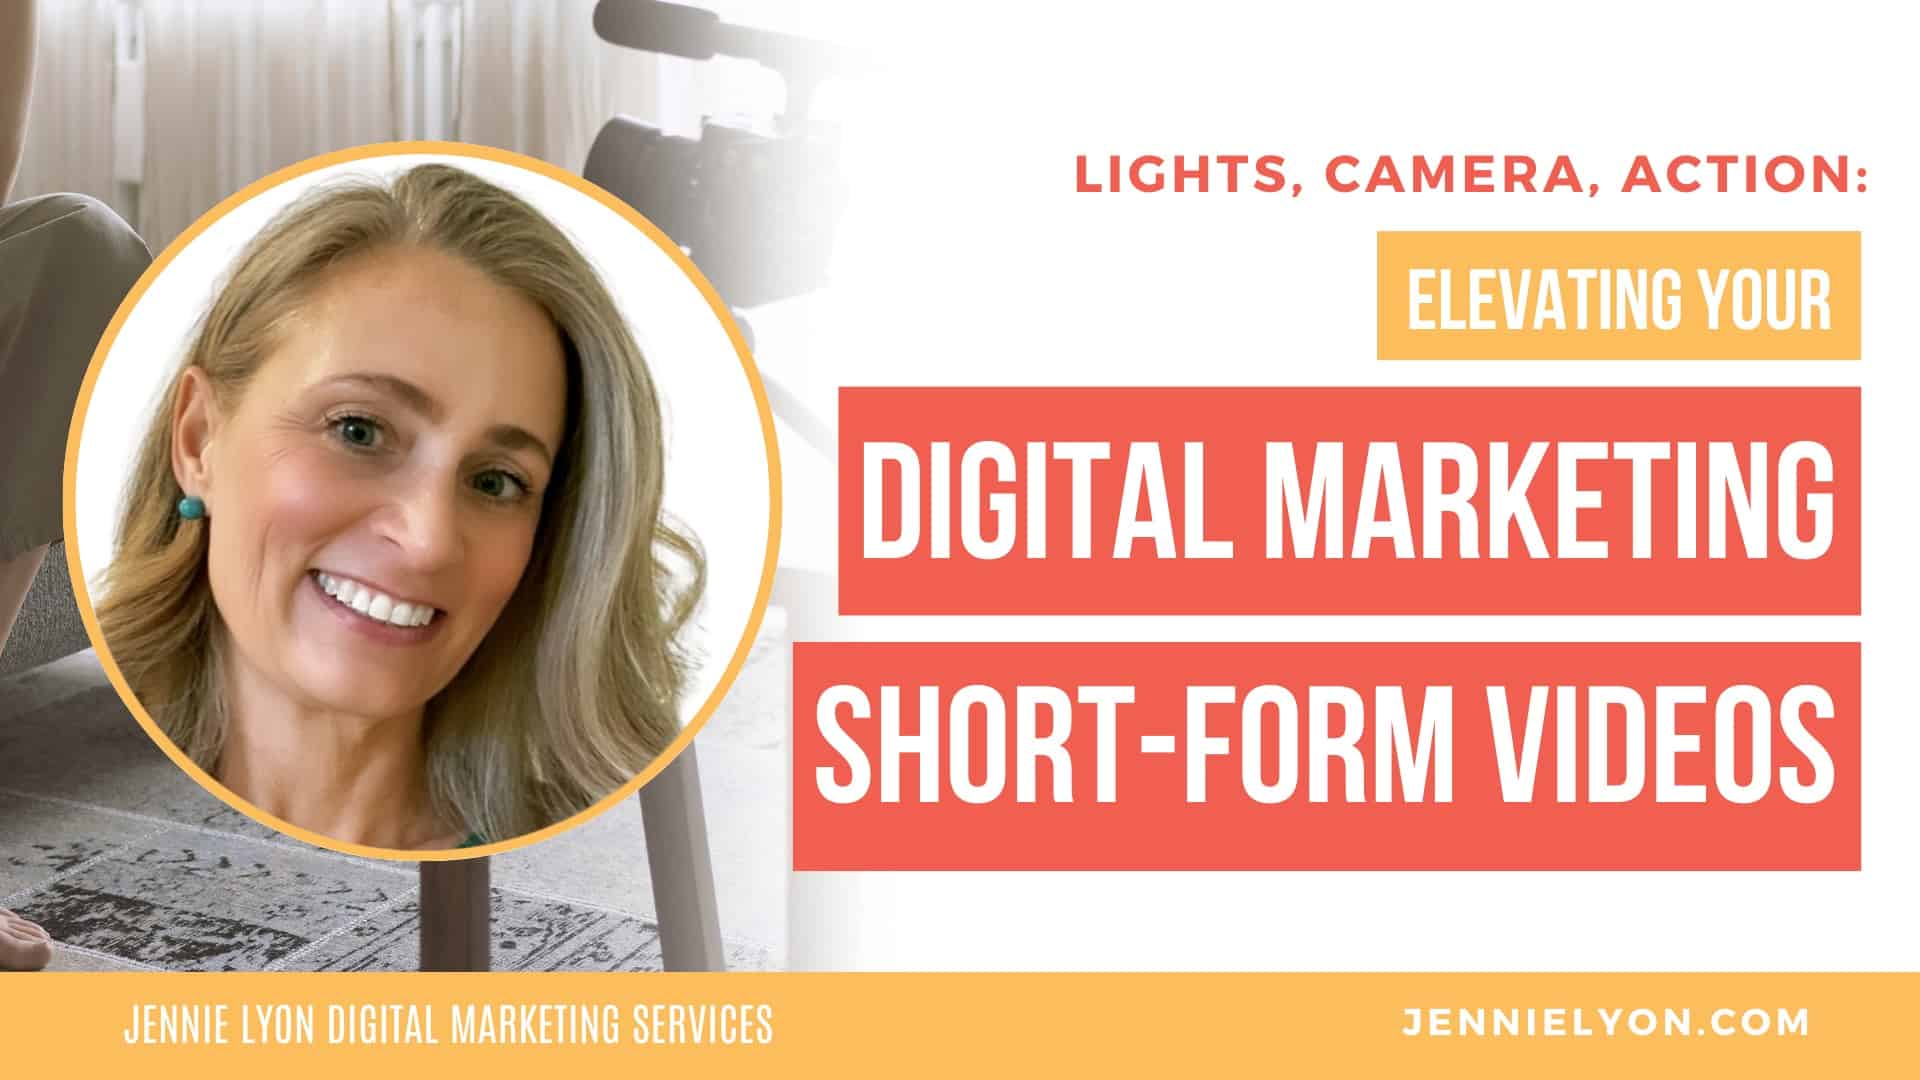 Lights, Camera, Action: Elevating Your Digital Marketing with Short-Form Videos